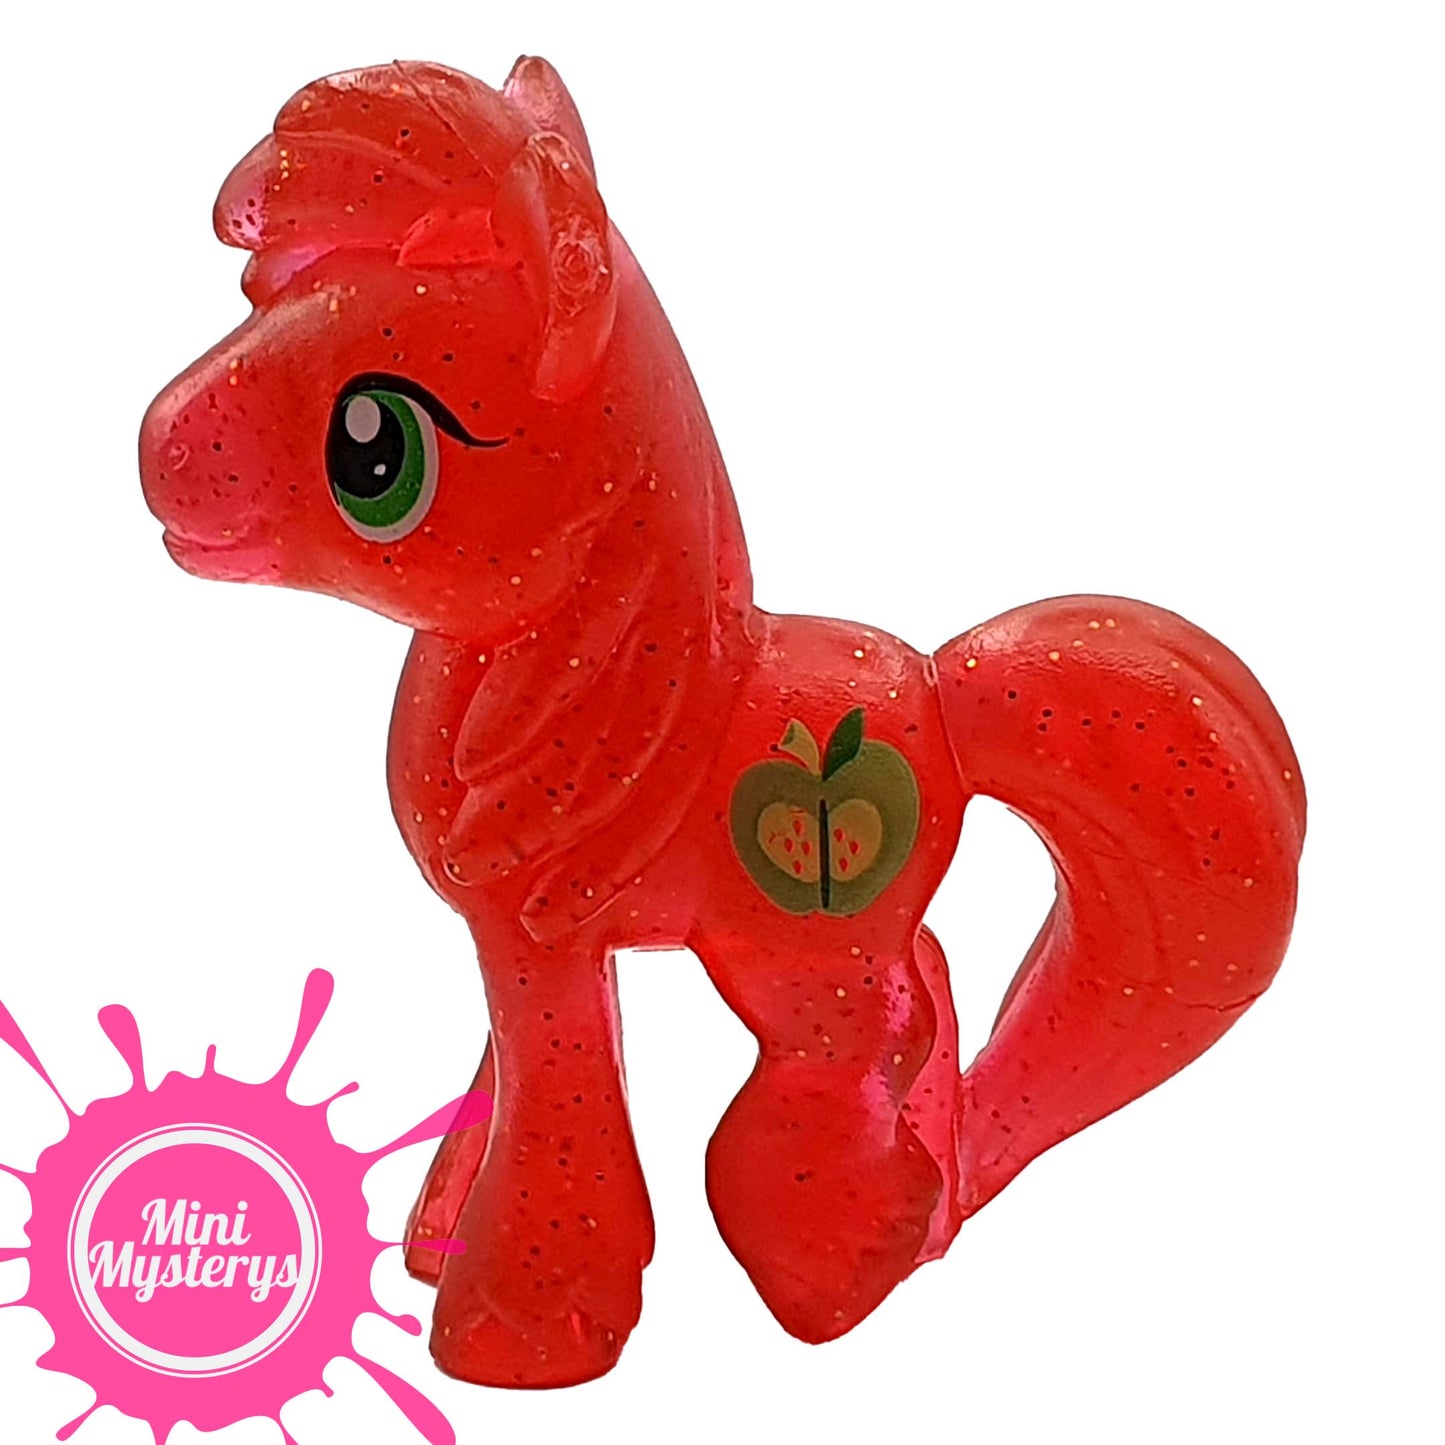 My Little Pony Friendship is Magic Figures - Choose Yours